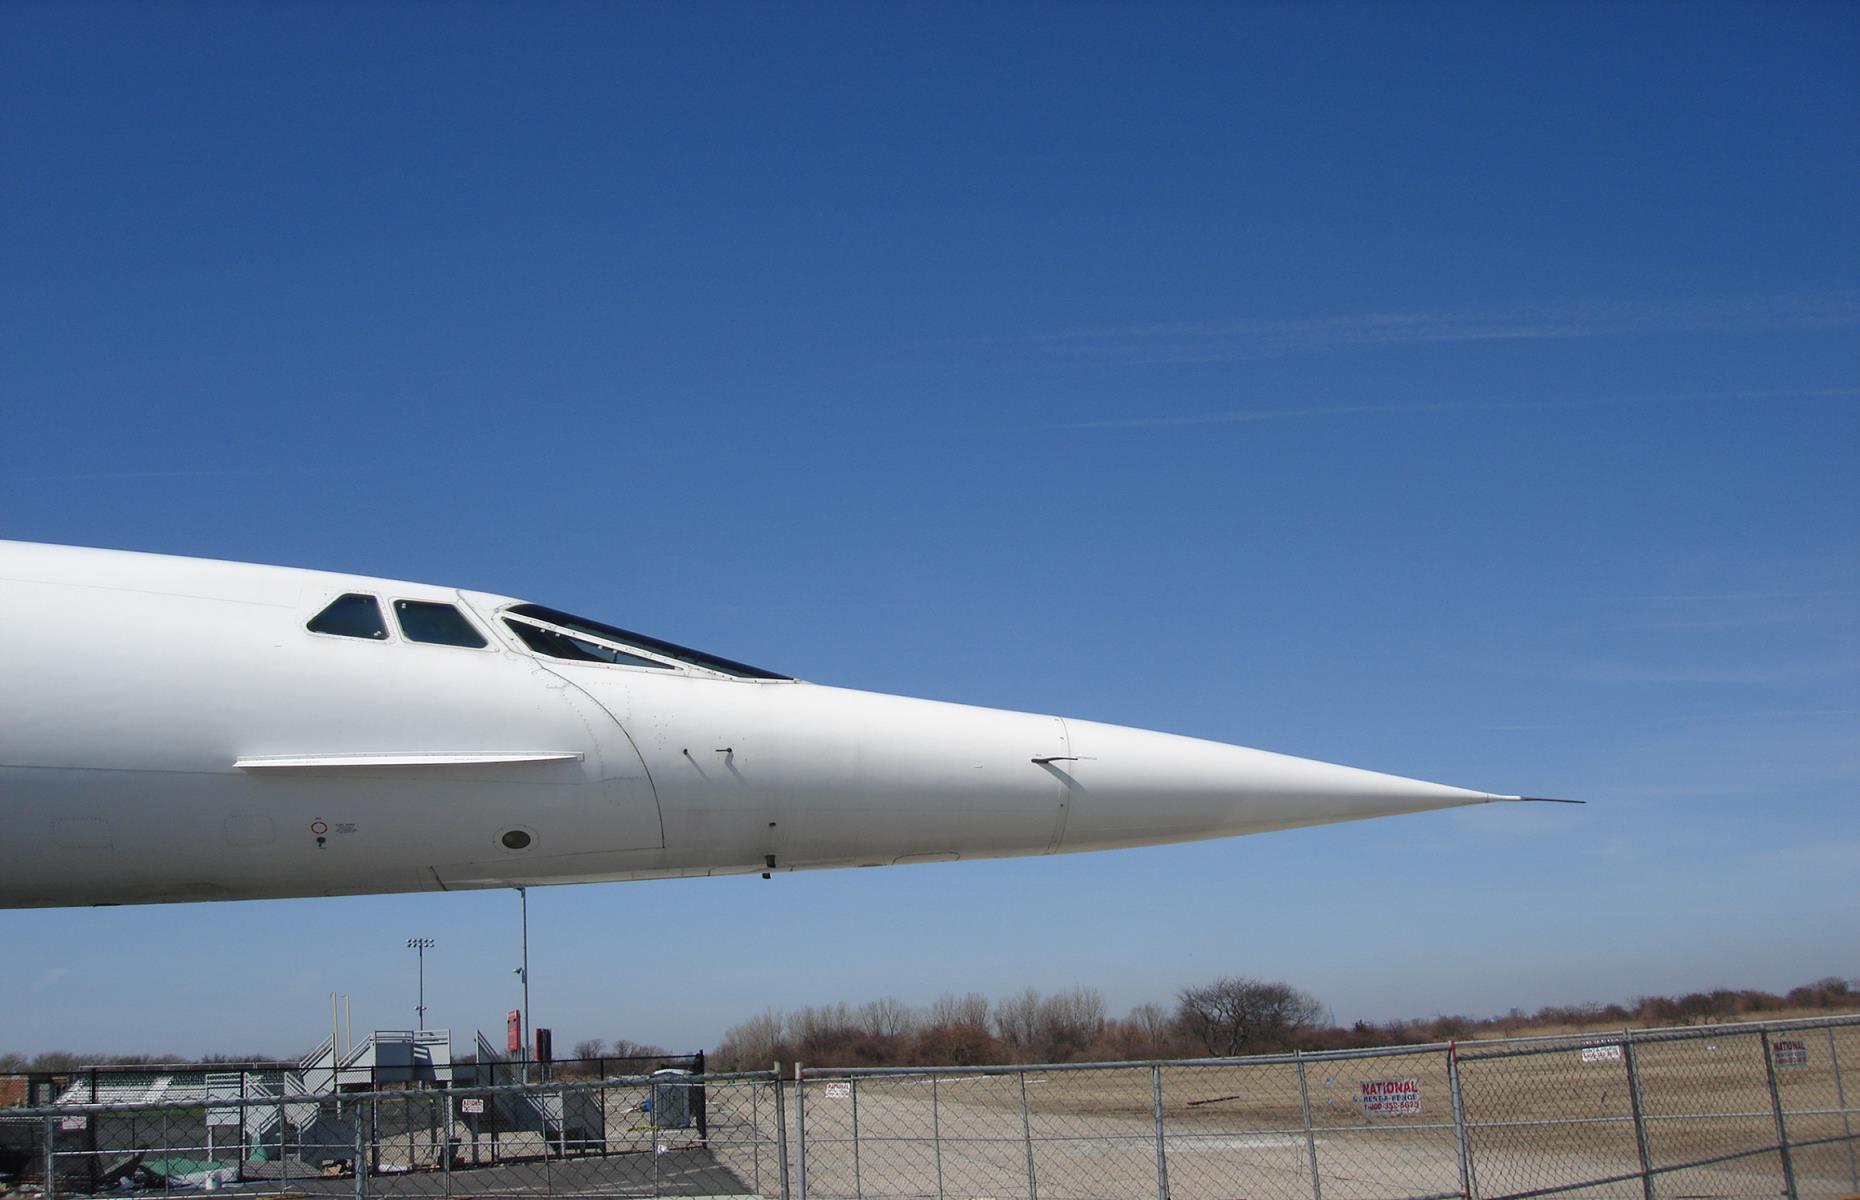 Launched in 1976, commercial airliner Concorde could transport passengers from London to New York in three hours, compared to the Boeing 737’s seven-hour journey. It stood for incredible aviation innovation, but after a tragic Air France crash in 2000 which killed 113 people, it was permanently retired.